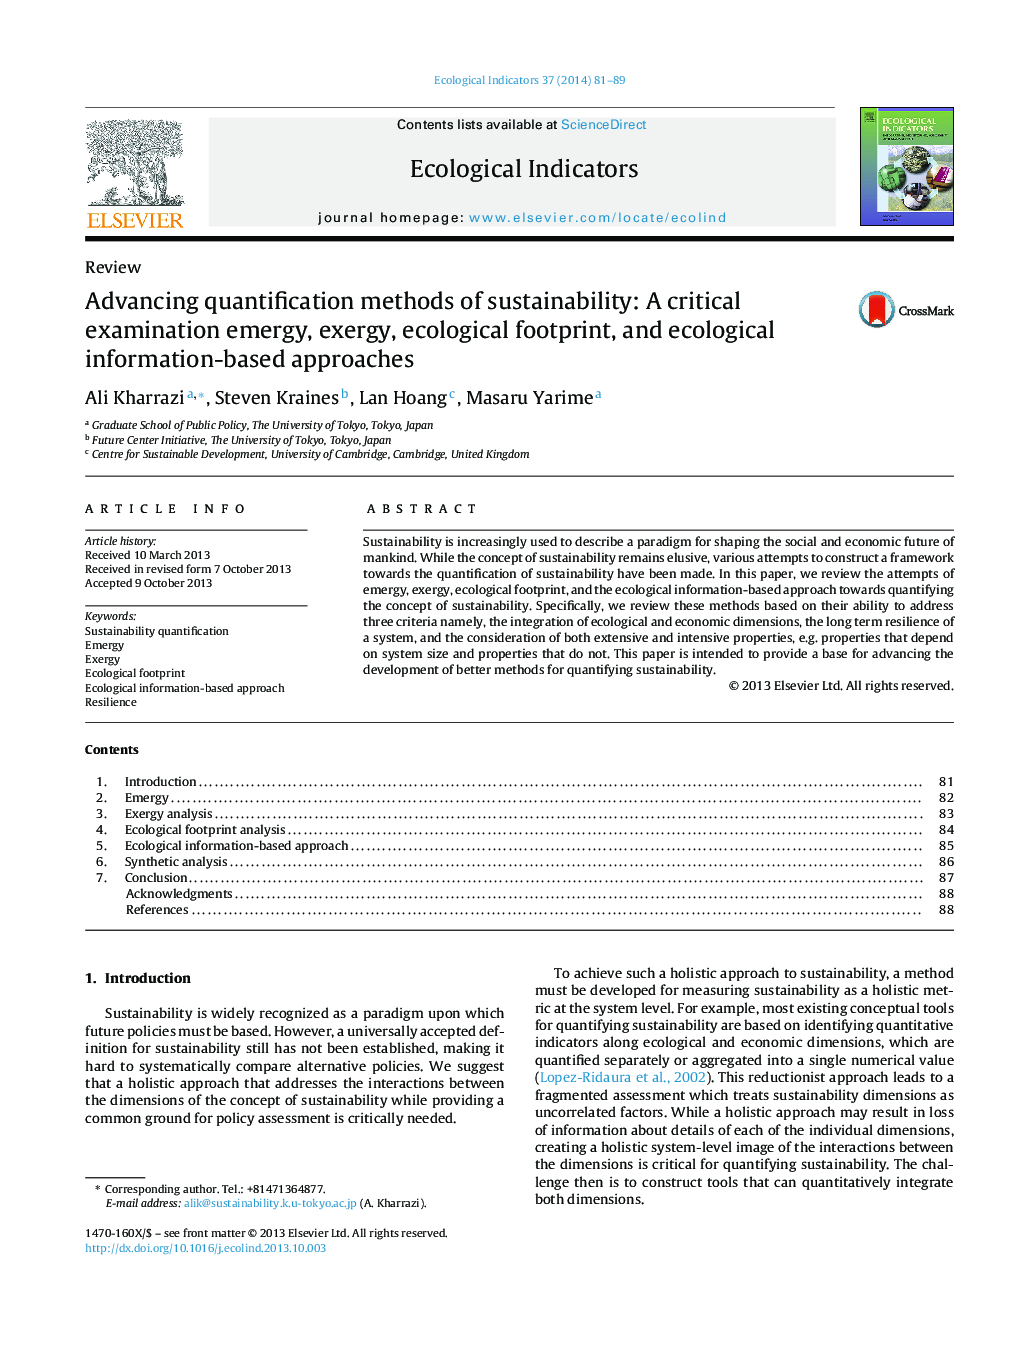 Advancing quantification methods of sustainability: A critical examination emergy, exergy, ecological footprint, and ecological information-based approaches